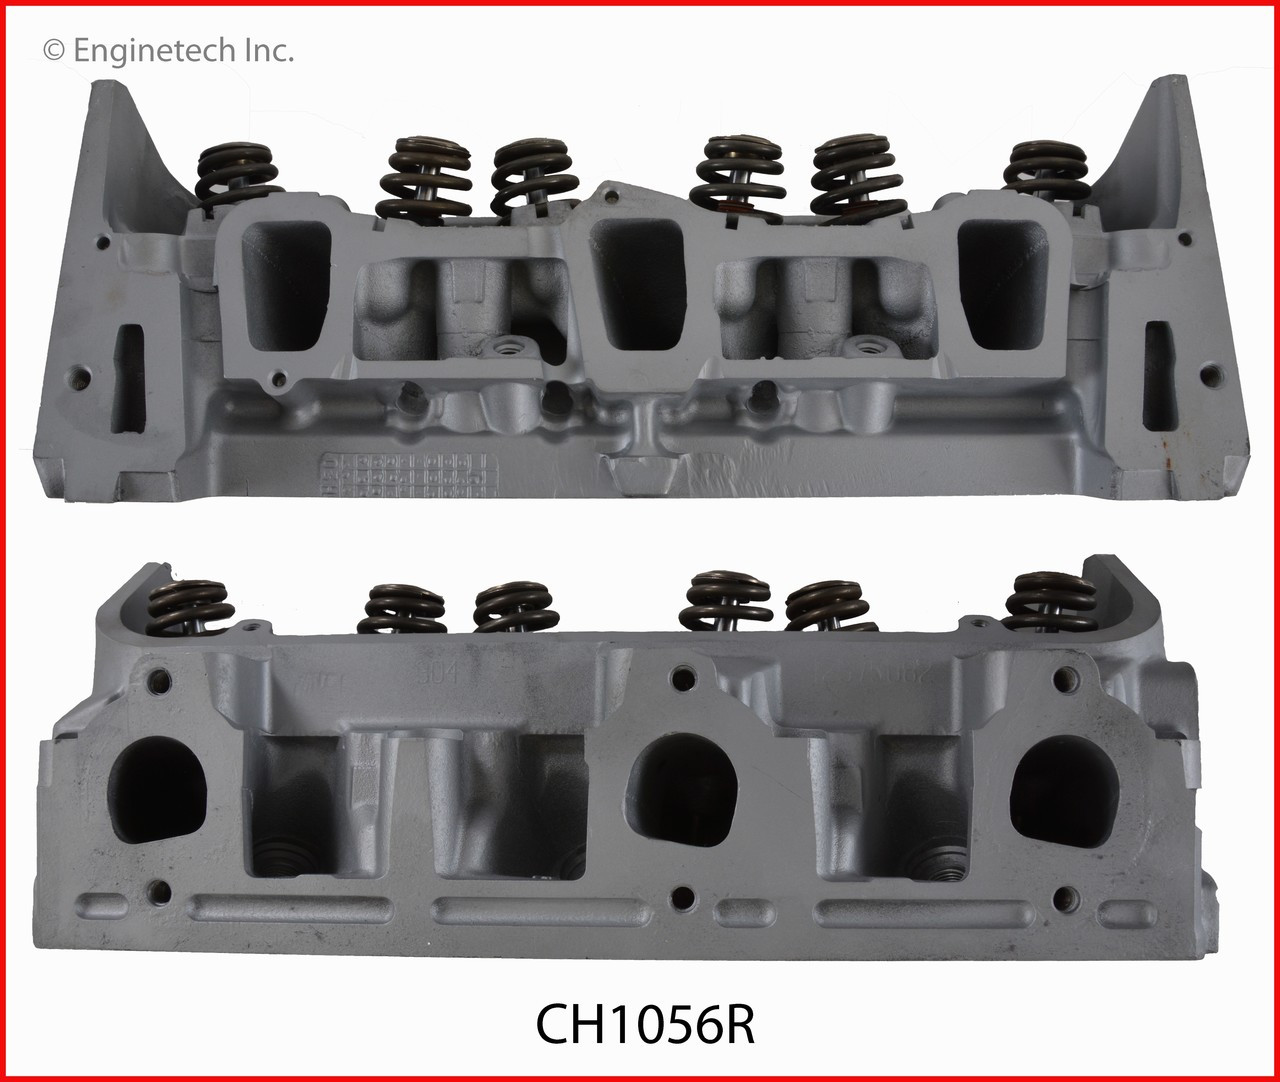 Cylinder Head Assembly - 2005 Chevrolet Monte Carlo 3.4L (CH1056R.C25)